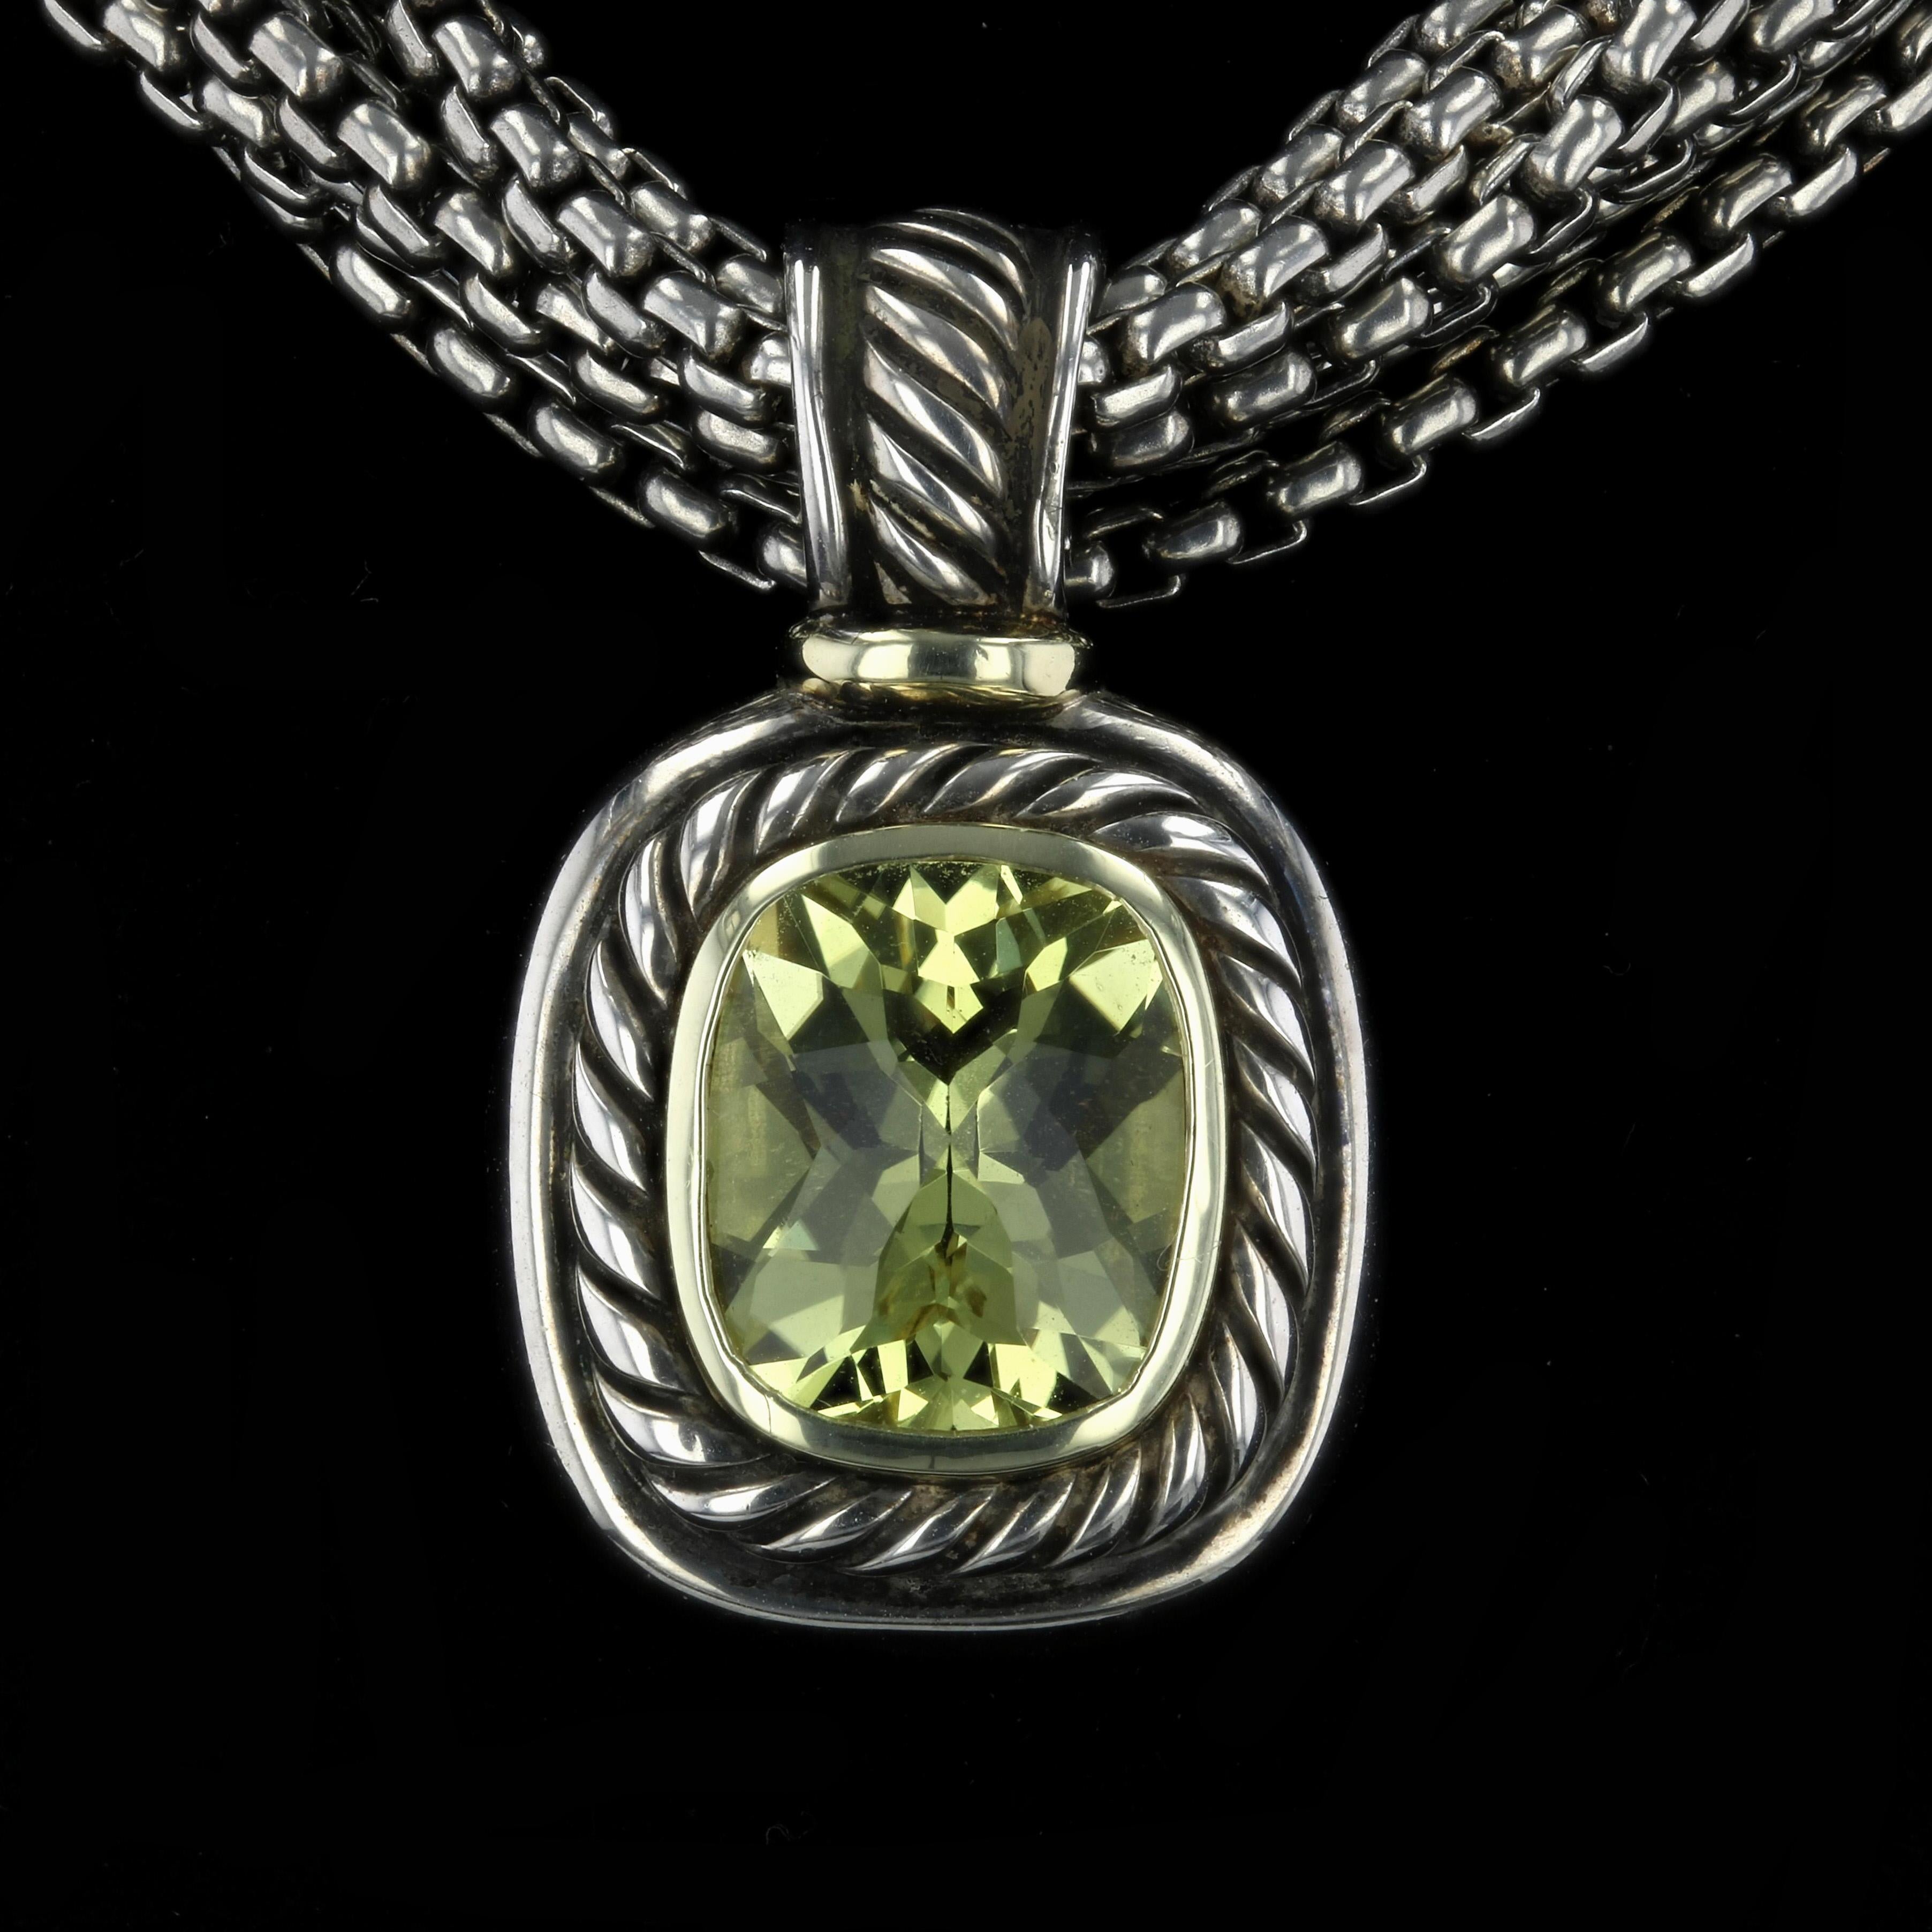 Estate David Yurman pendant with classic cable twist motif. In the center is one rectangular cushion cut yellow-green peridot measuring approximately 11mm x 13mm.